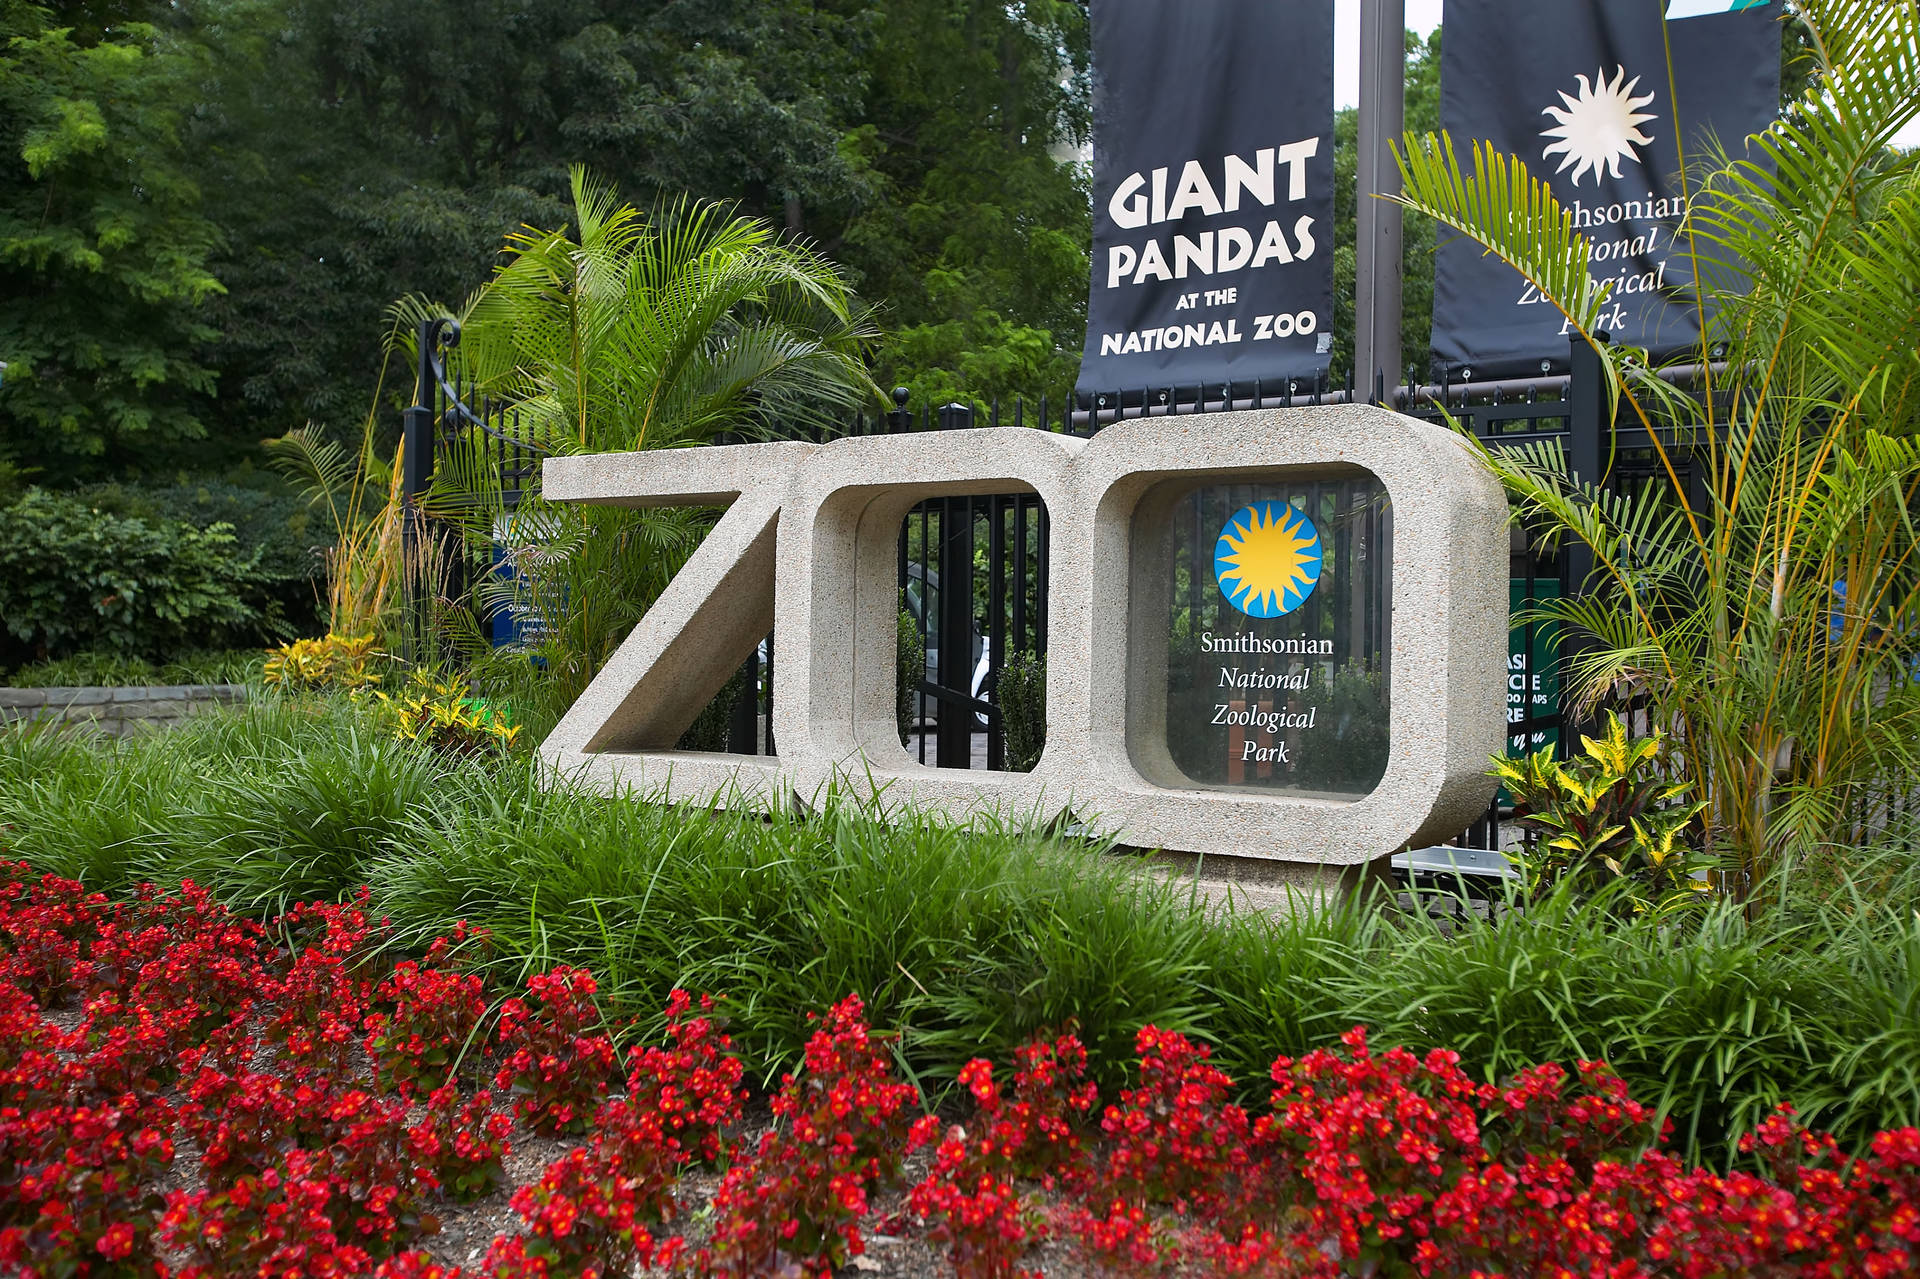 Smithsoniannational Zoological Park Can Be Translated To German As 